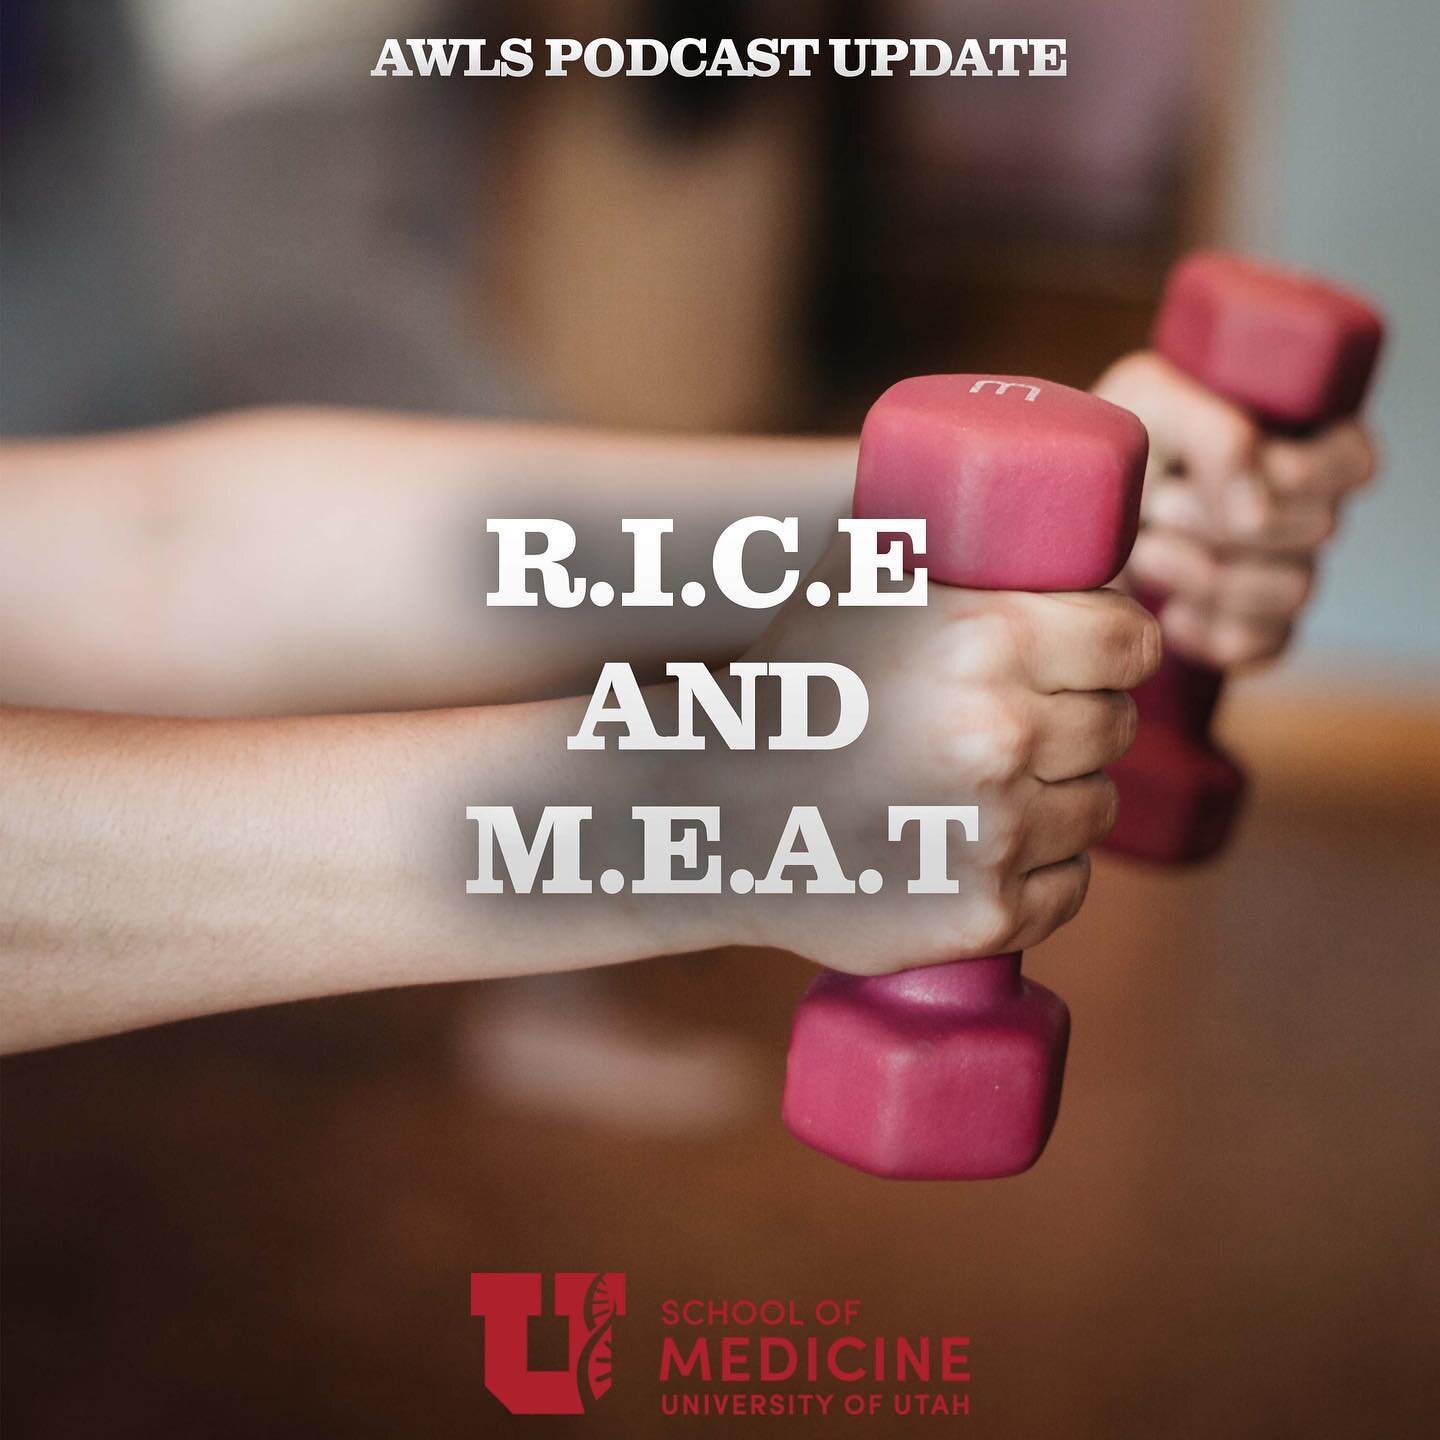 For years we have all used RICE therapy for treatment of athletic injuries. But now MEAT is becoming the preferred therapy. What do we do in the wilderness for these types of injuries? This update looks at the issues.

Listen to our AWLS podcasts whe